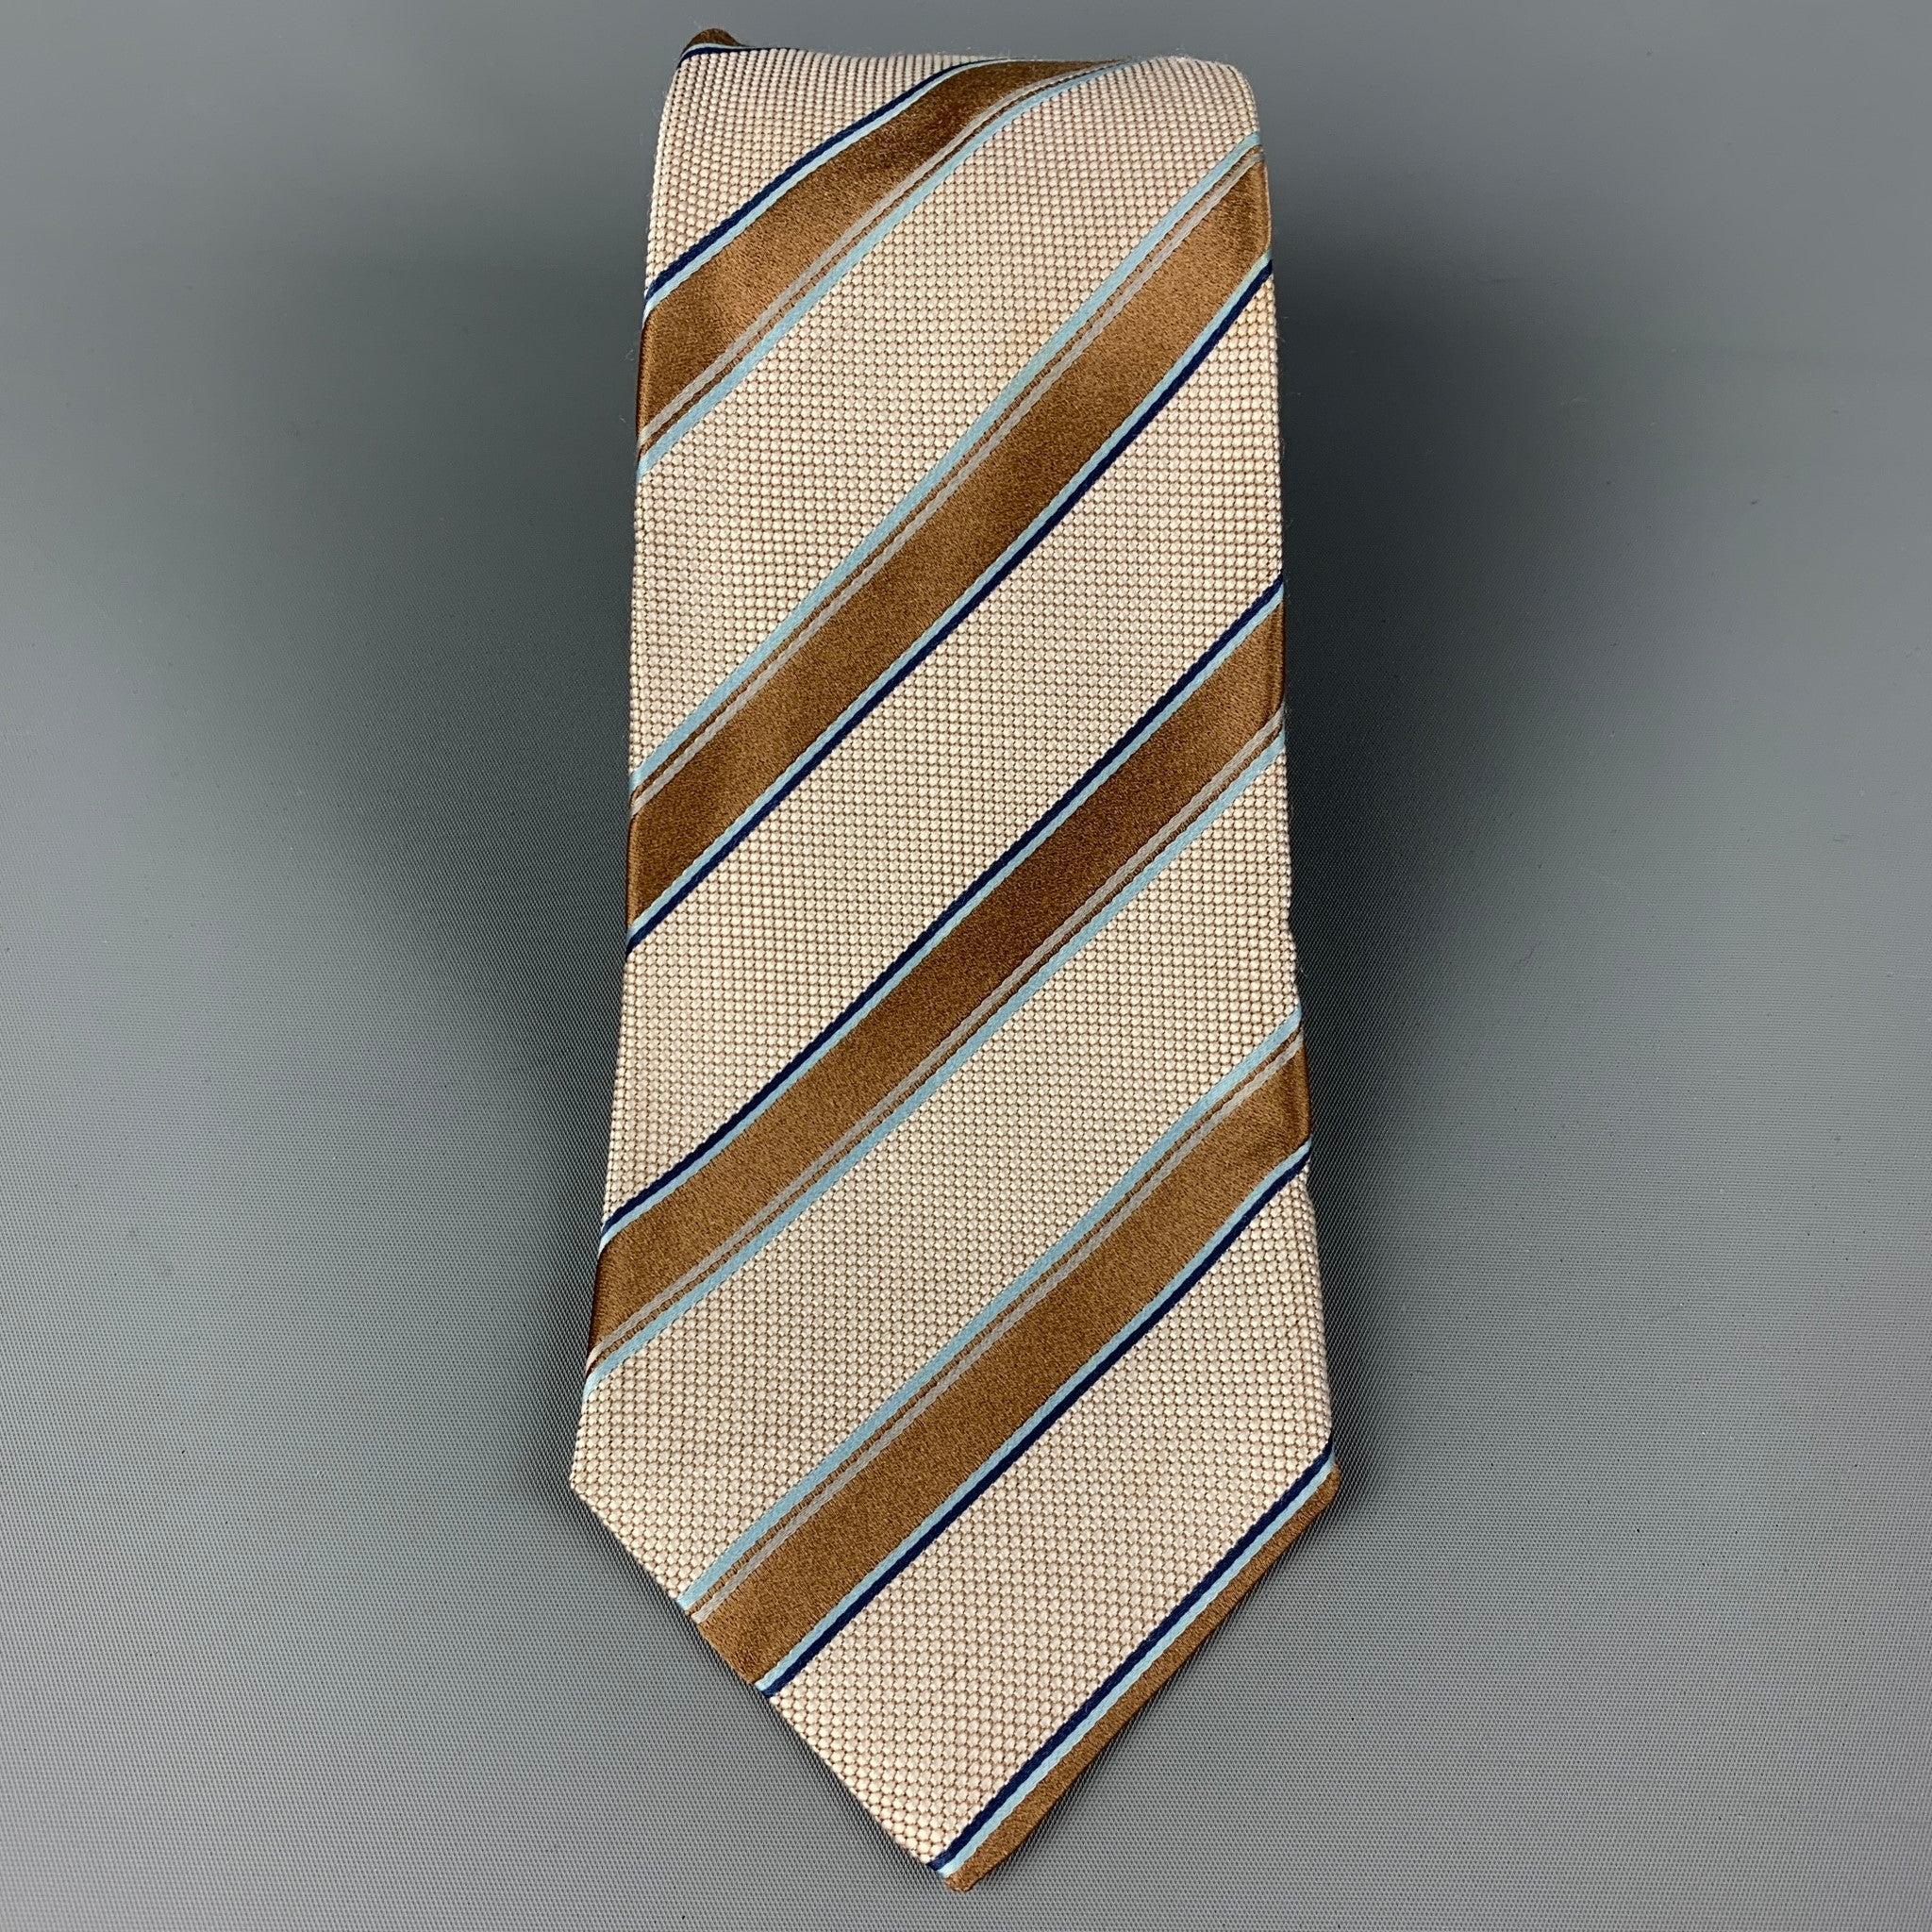 KITON necktie comes in a tan & white silk with a all over diagonal stripe print. Made in Italy . Very Good Pre-Owned Condition.Width: 3.75 inches  Length: 61 inches 


  
  
 
Reference: 120374
Category: Tie
More Details
    
Brand:  KITON
Gender: 